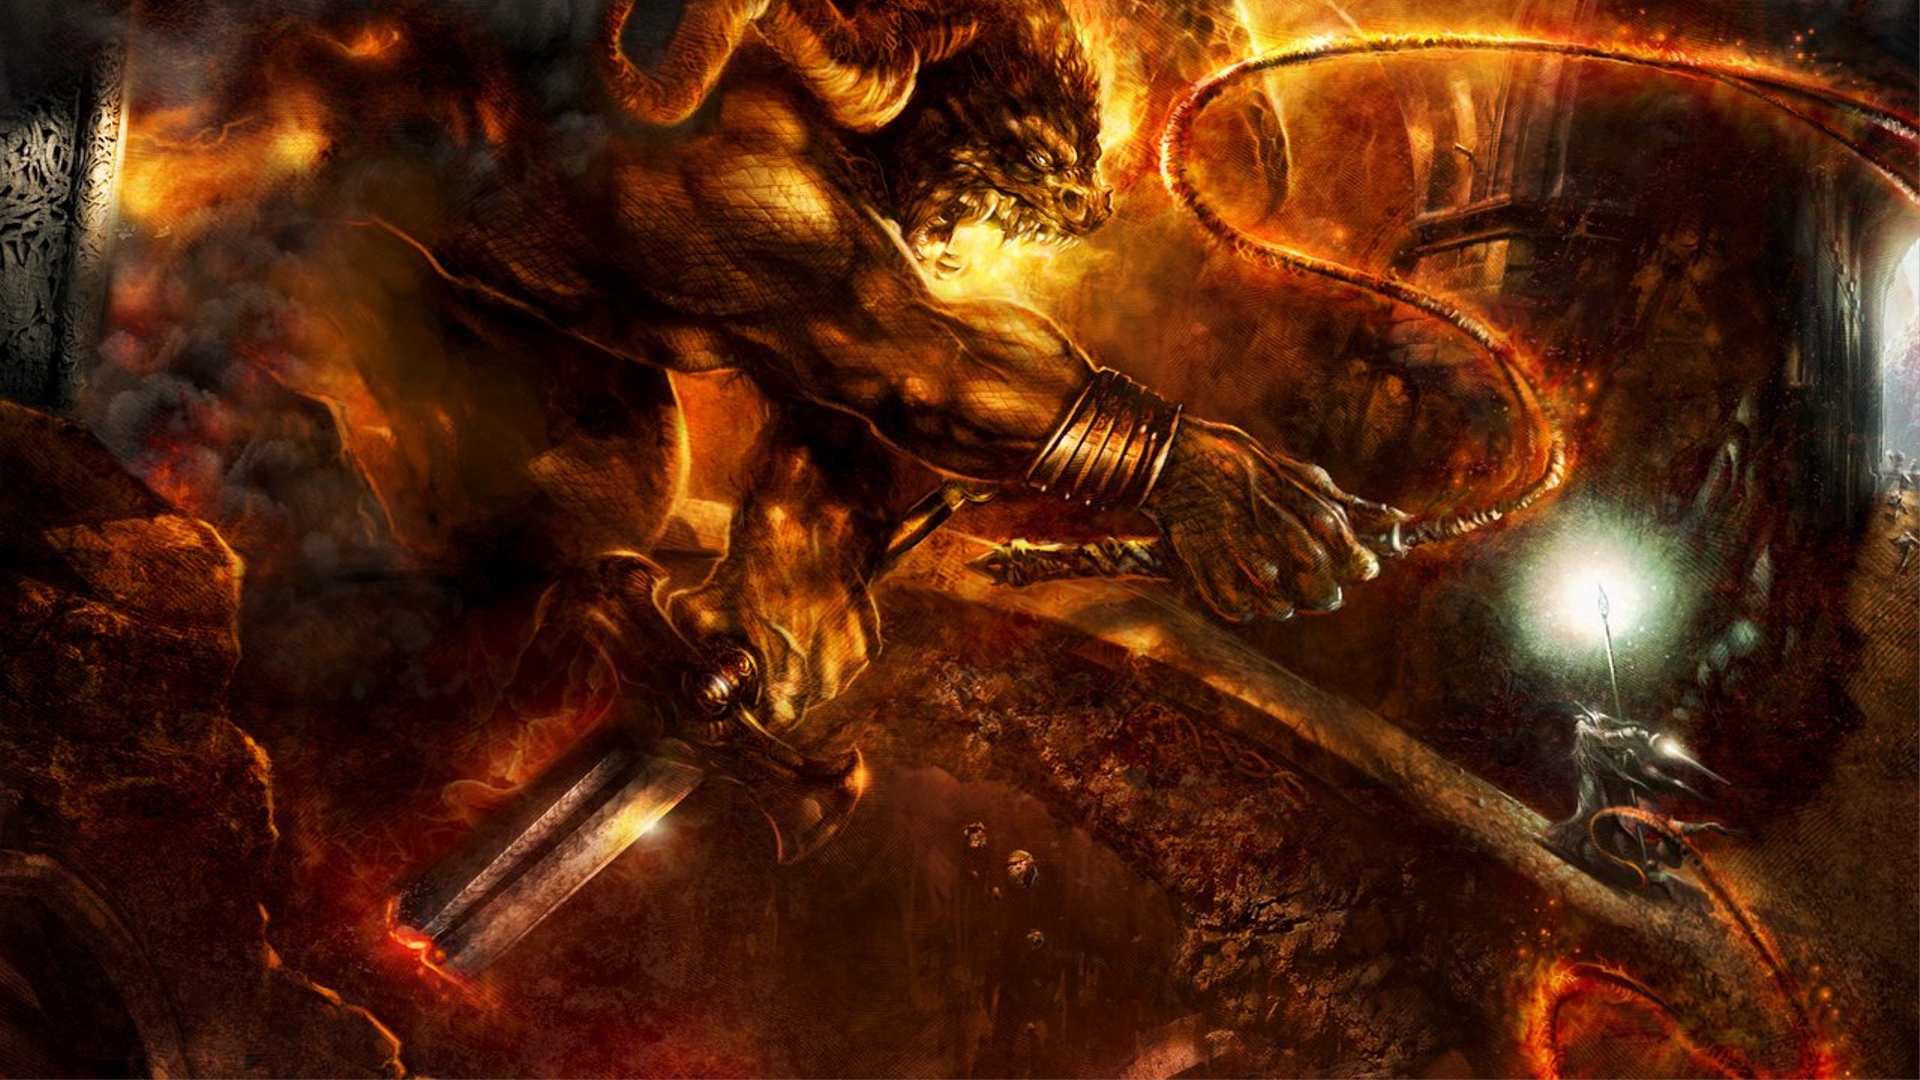 Gandalf Wallpaper Balrog The Lord Of Rings